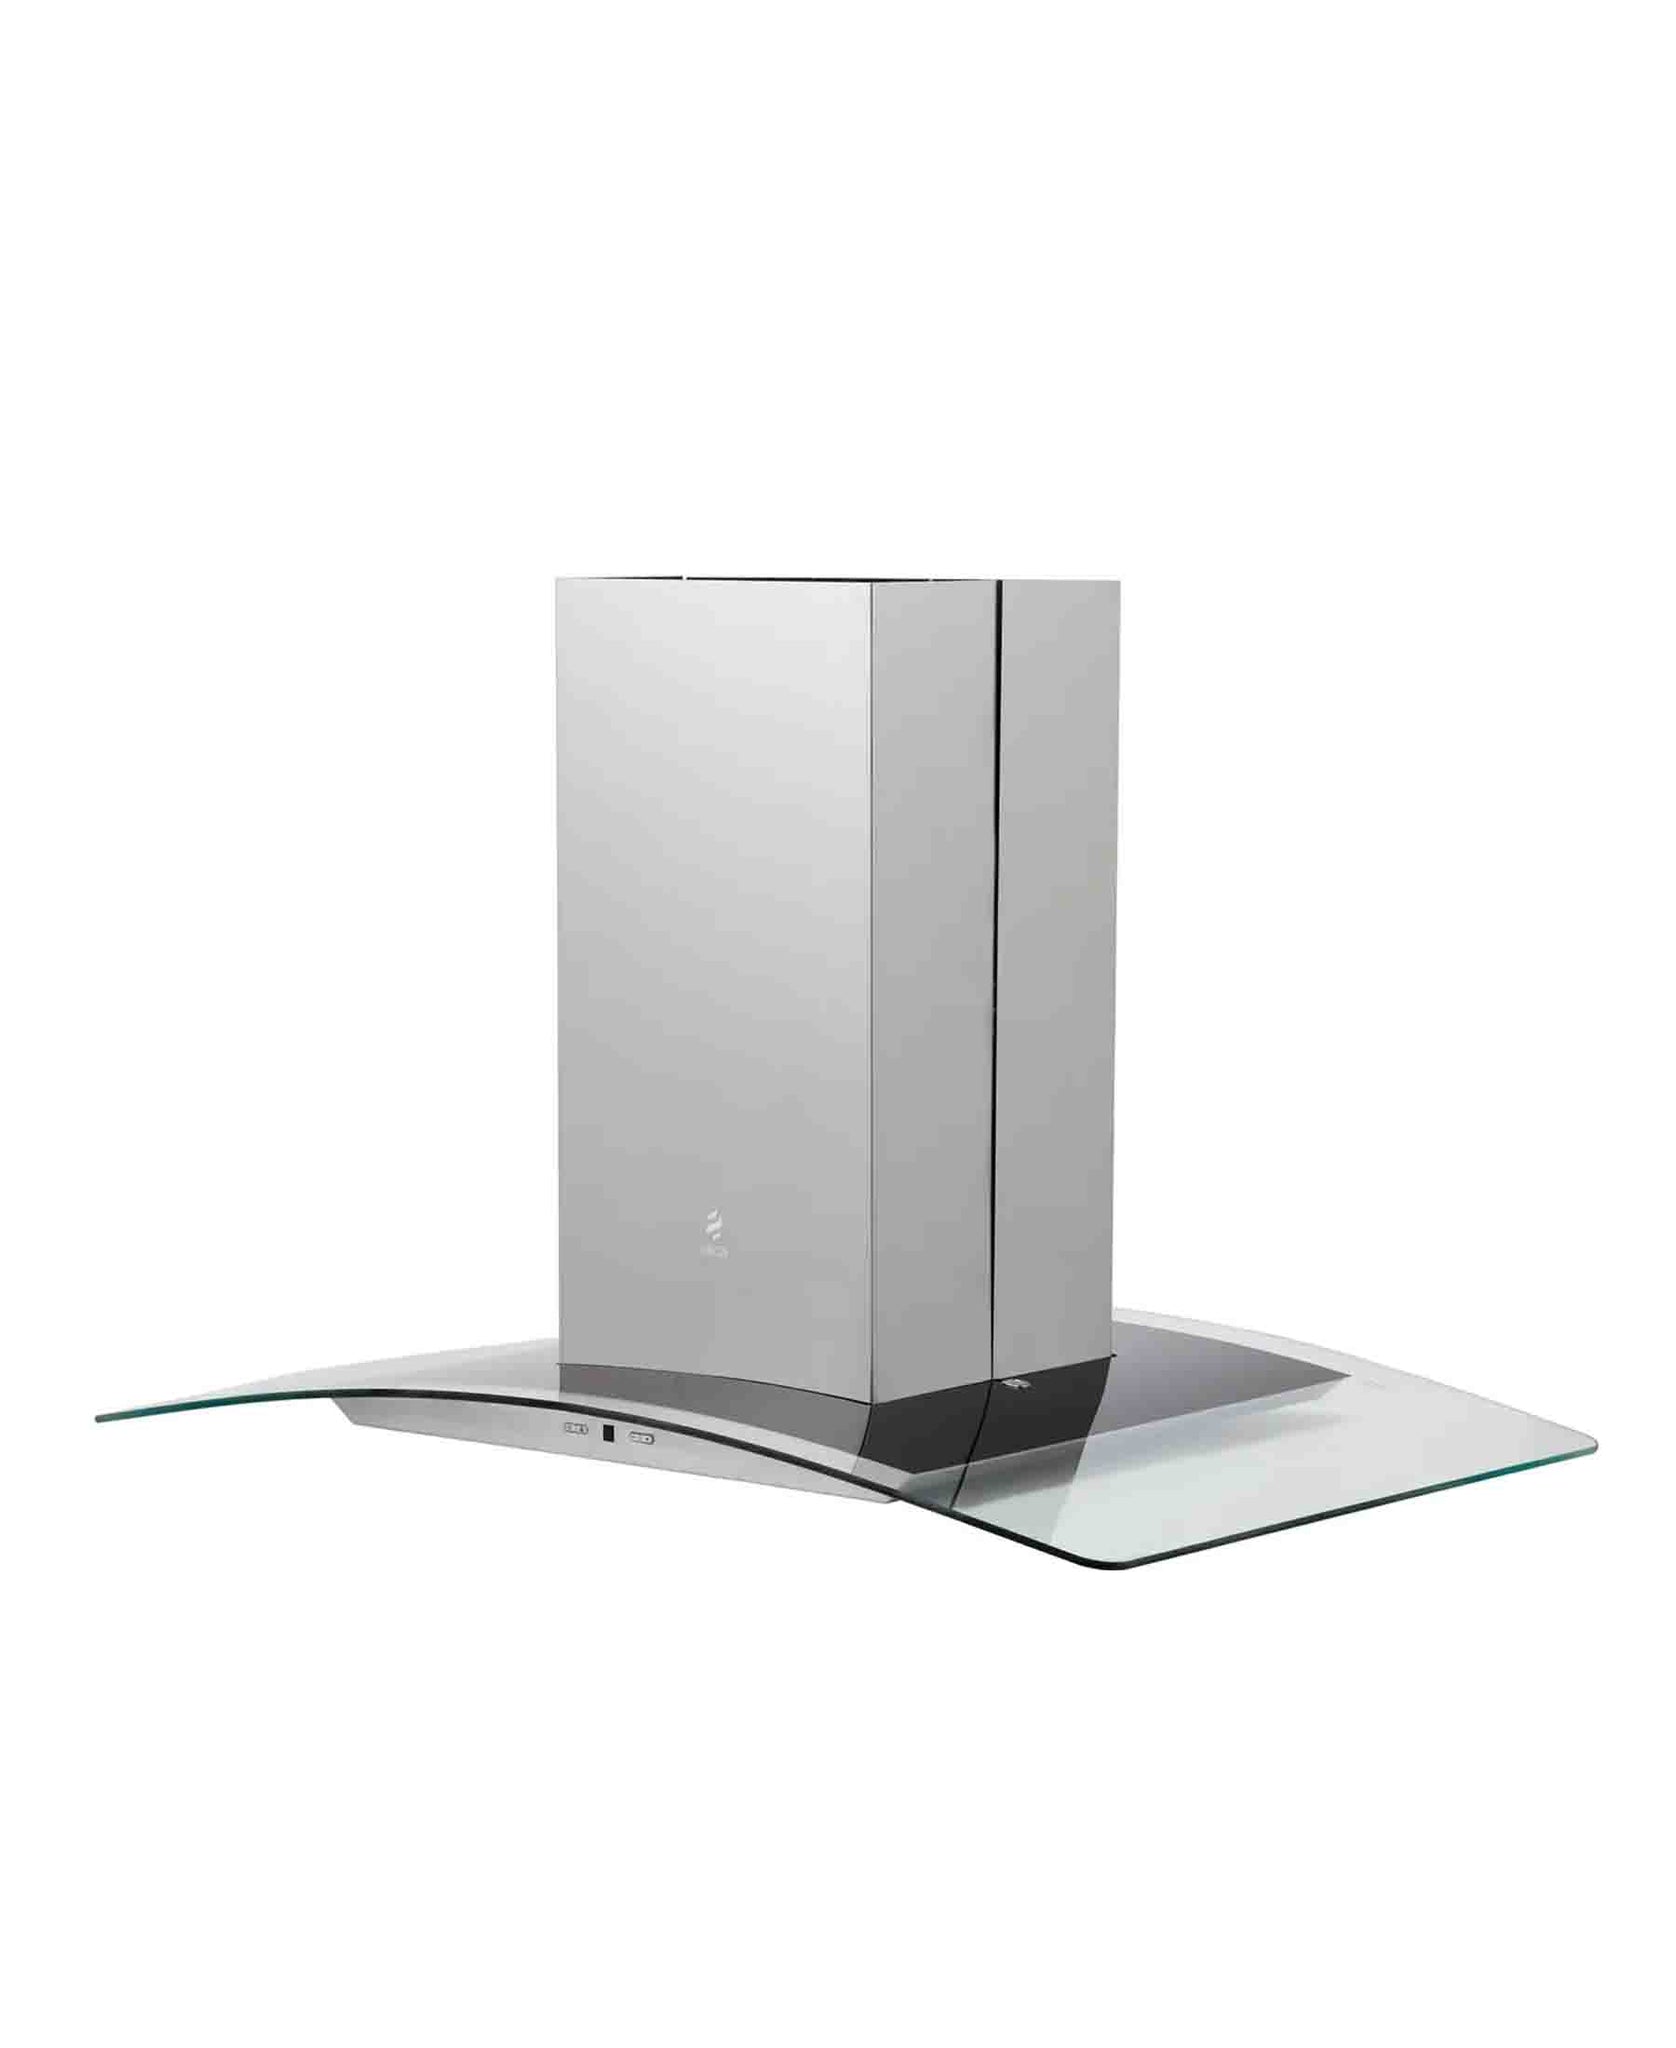 Elica Curved Glass Island Cooker Hood - Silver